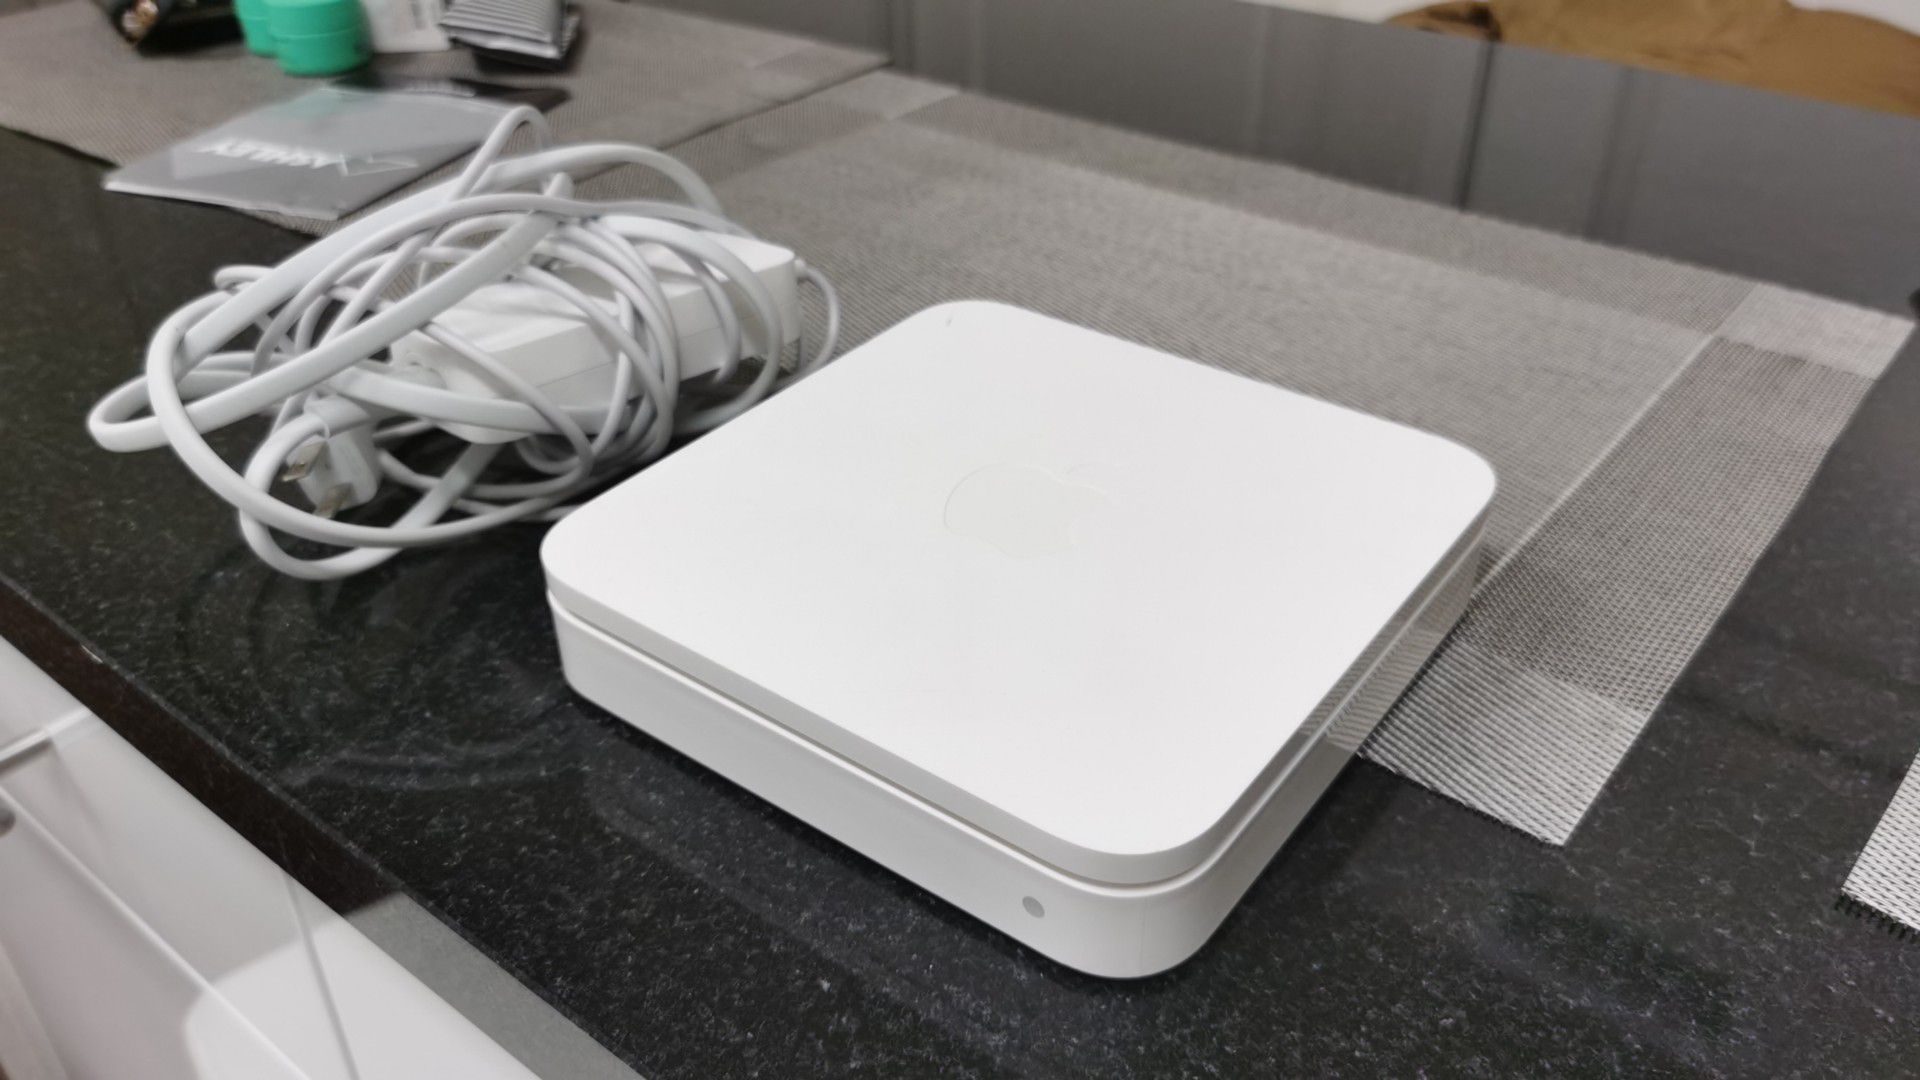 Apple Router